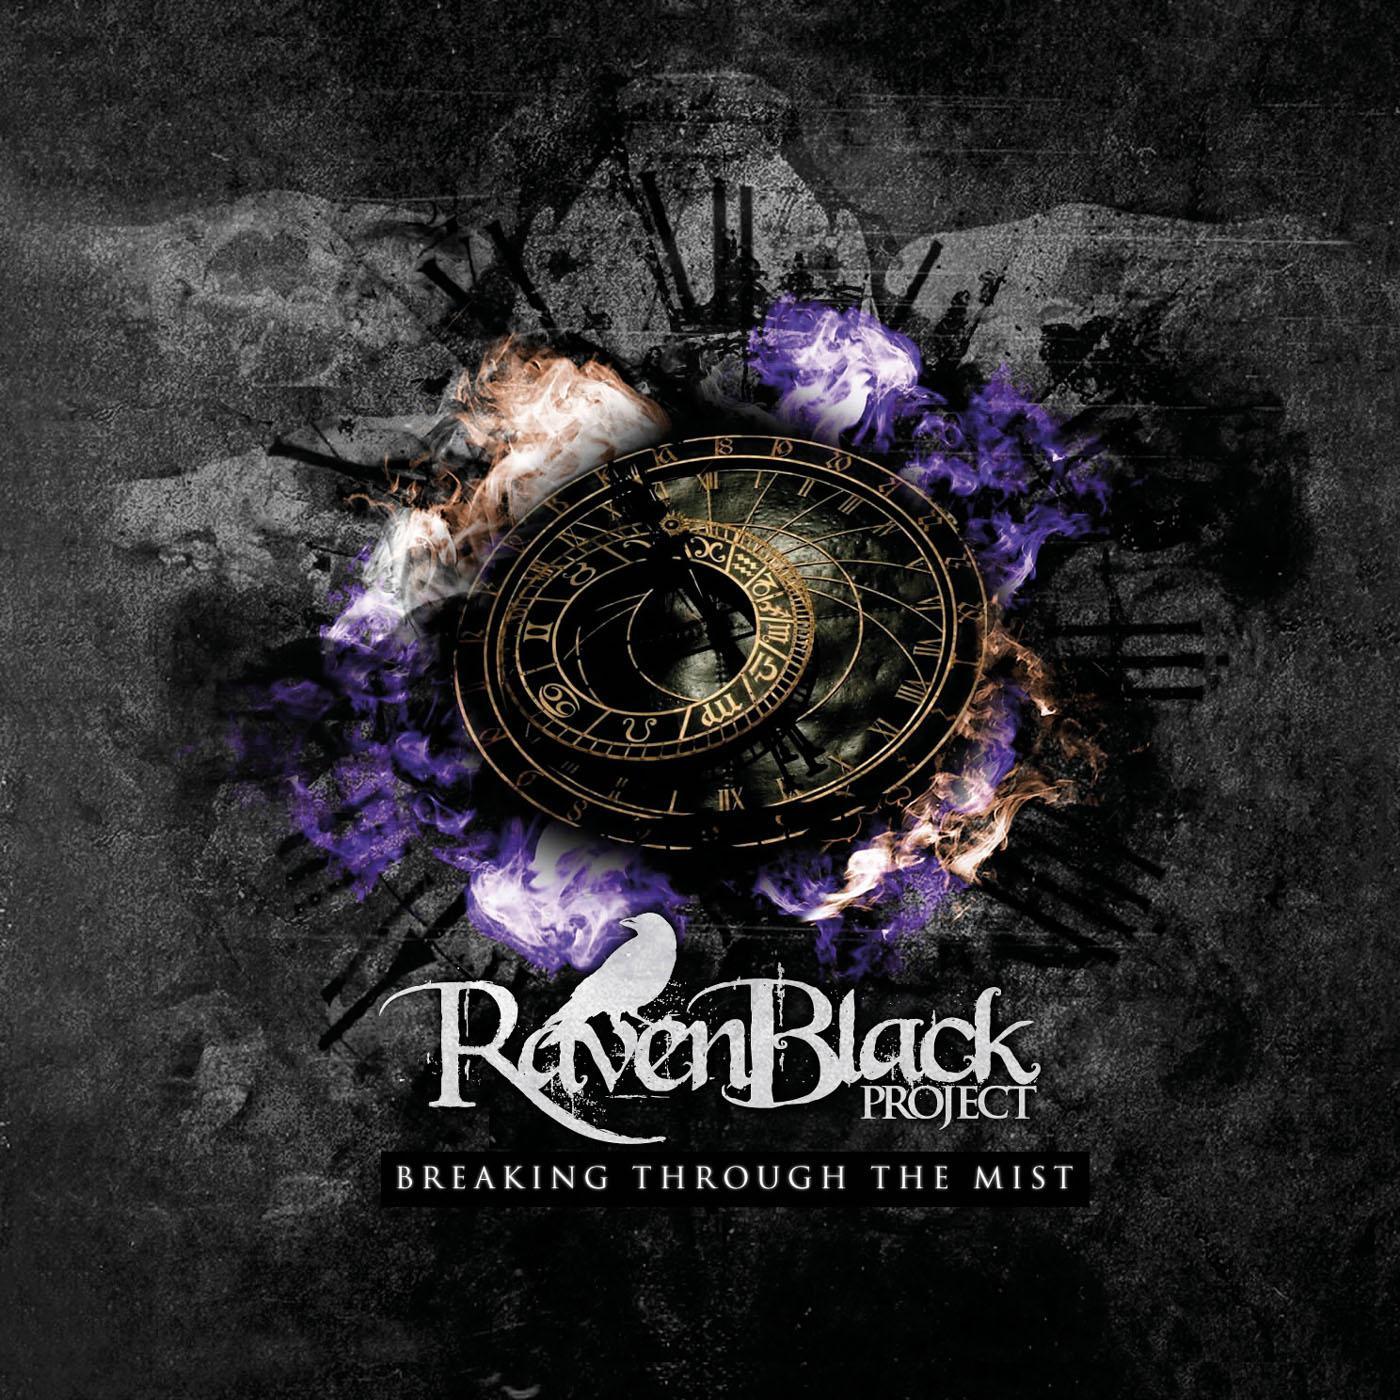 Ravenblack Project - The Ancestral Call